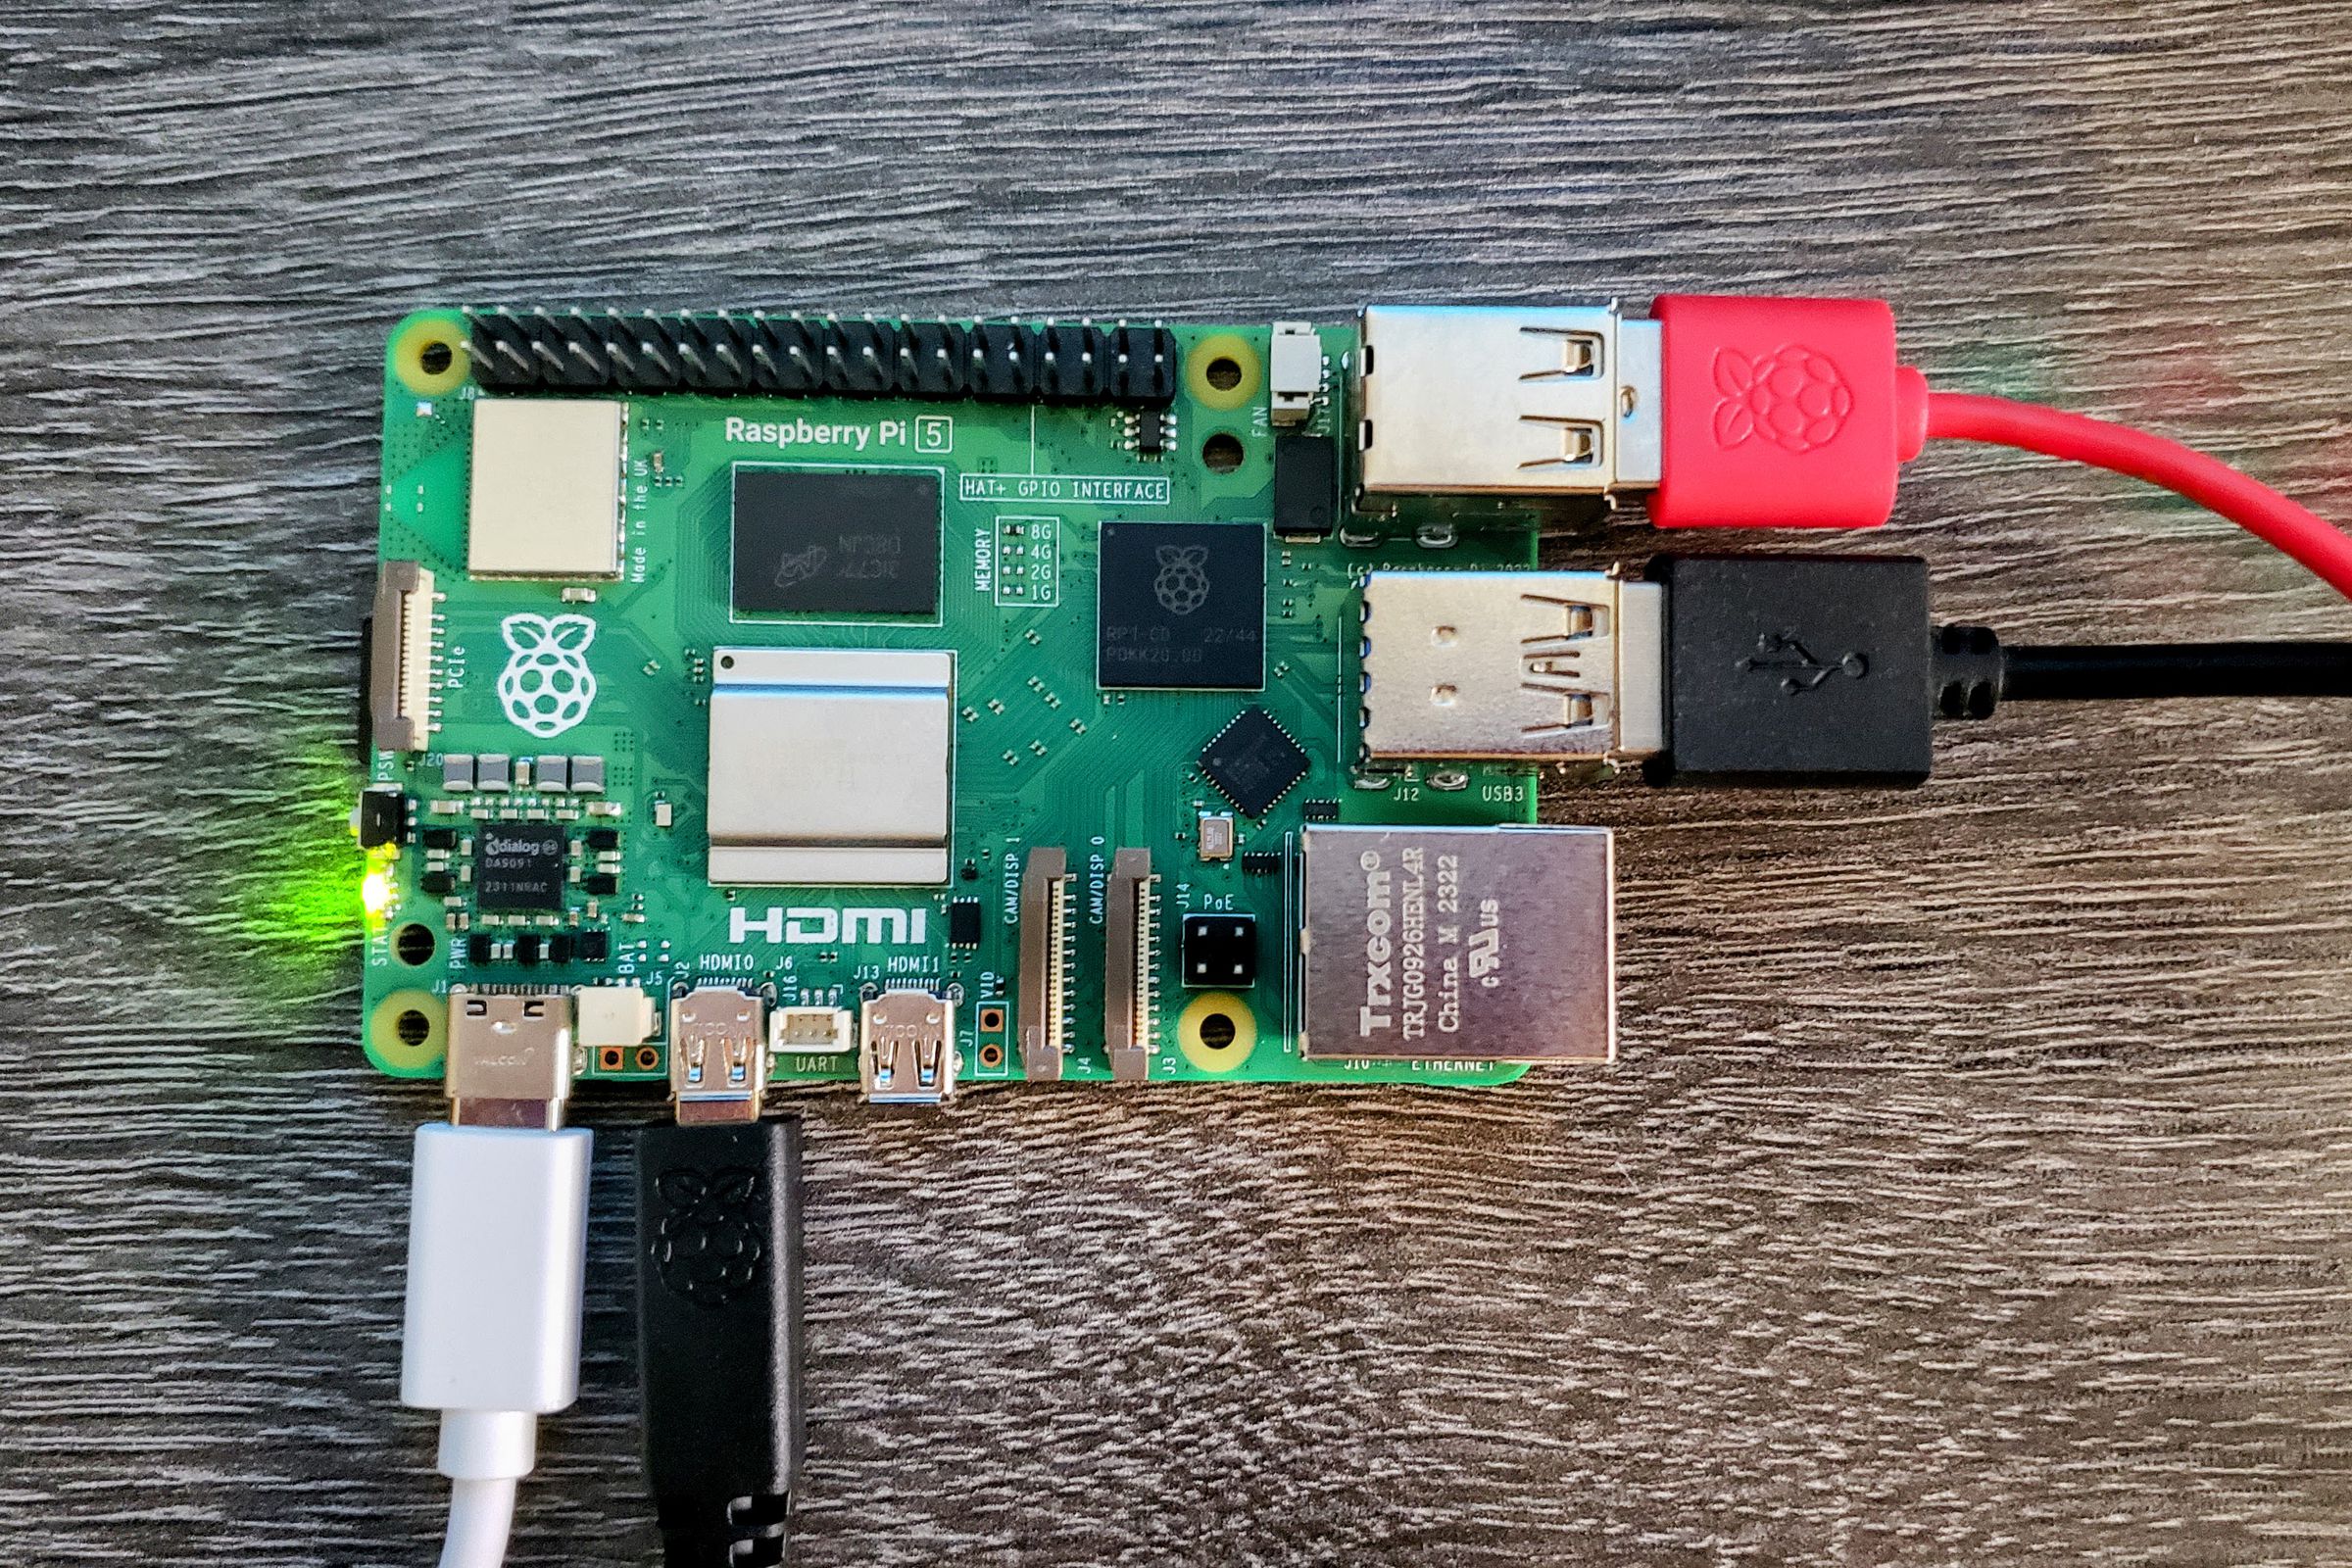 A photo showing the Raspberry Pi 5 with USB cables and a micro HDMI cable plugged in